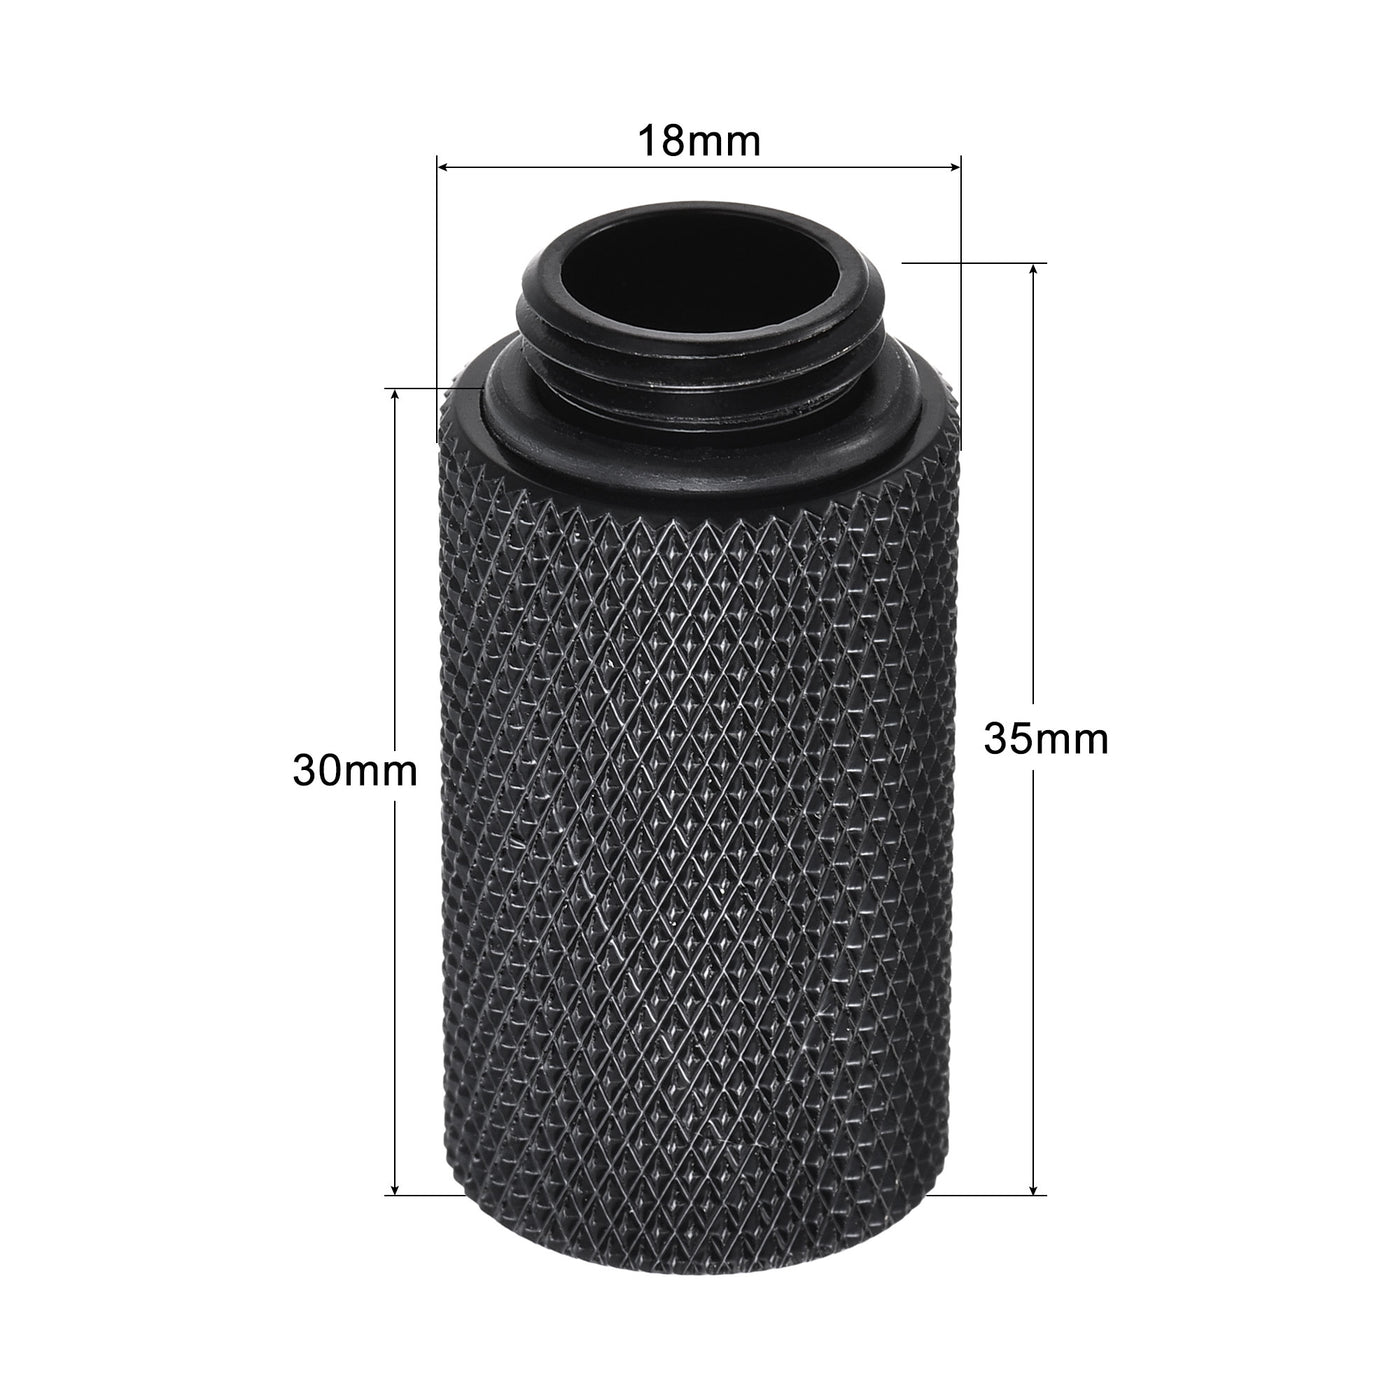 uxcell Uxcell Male to Female Extender Fitting G1/4 x 30mm for Water Cooling System Black